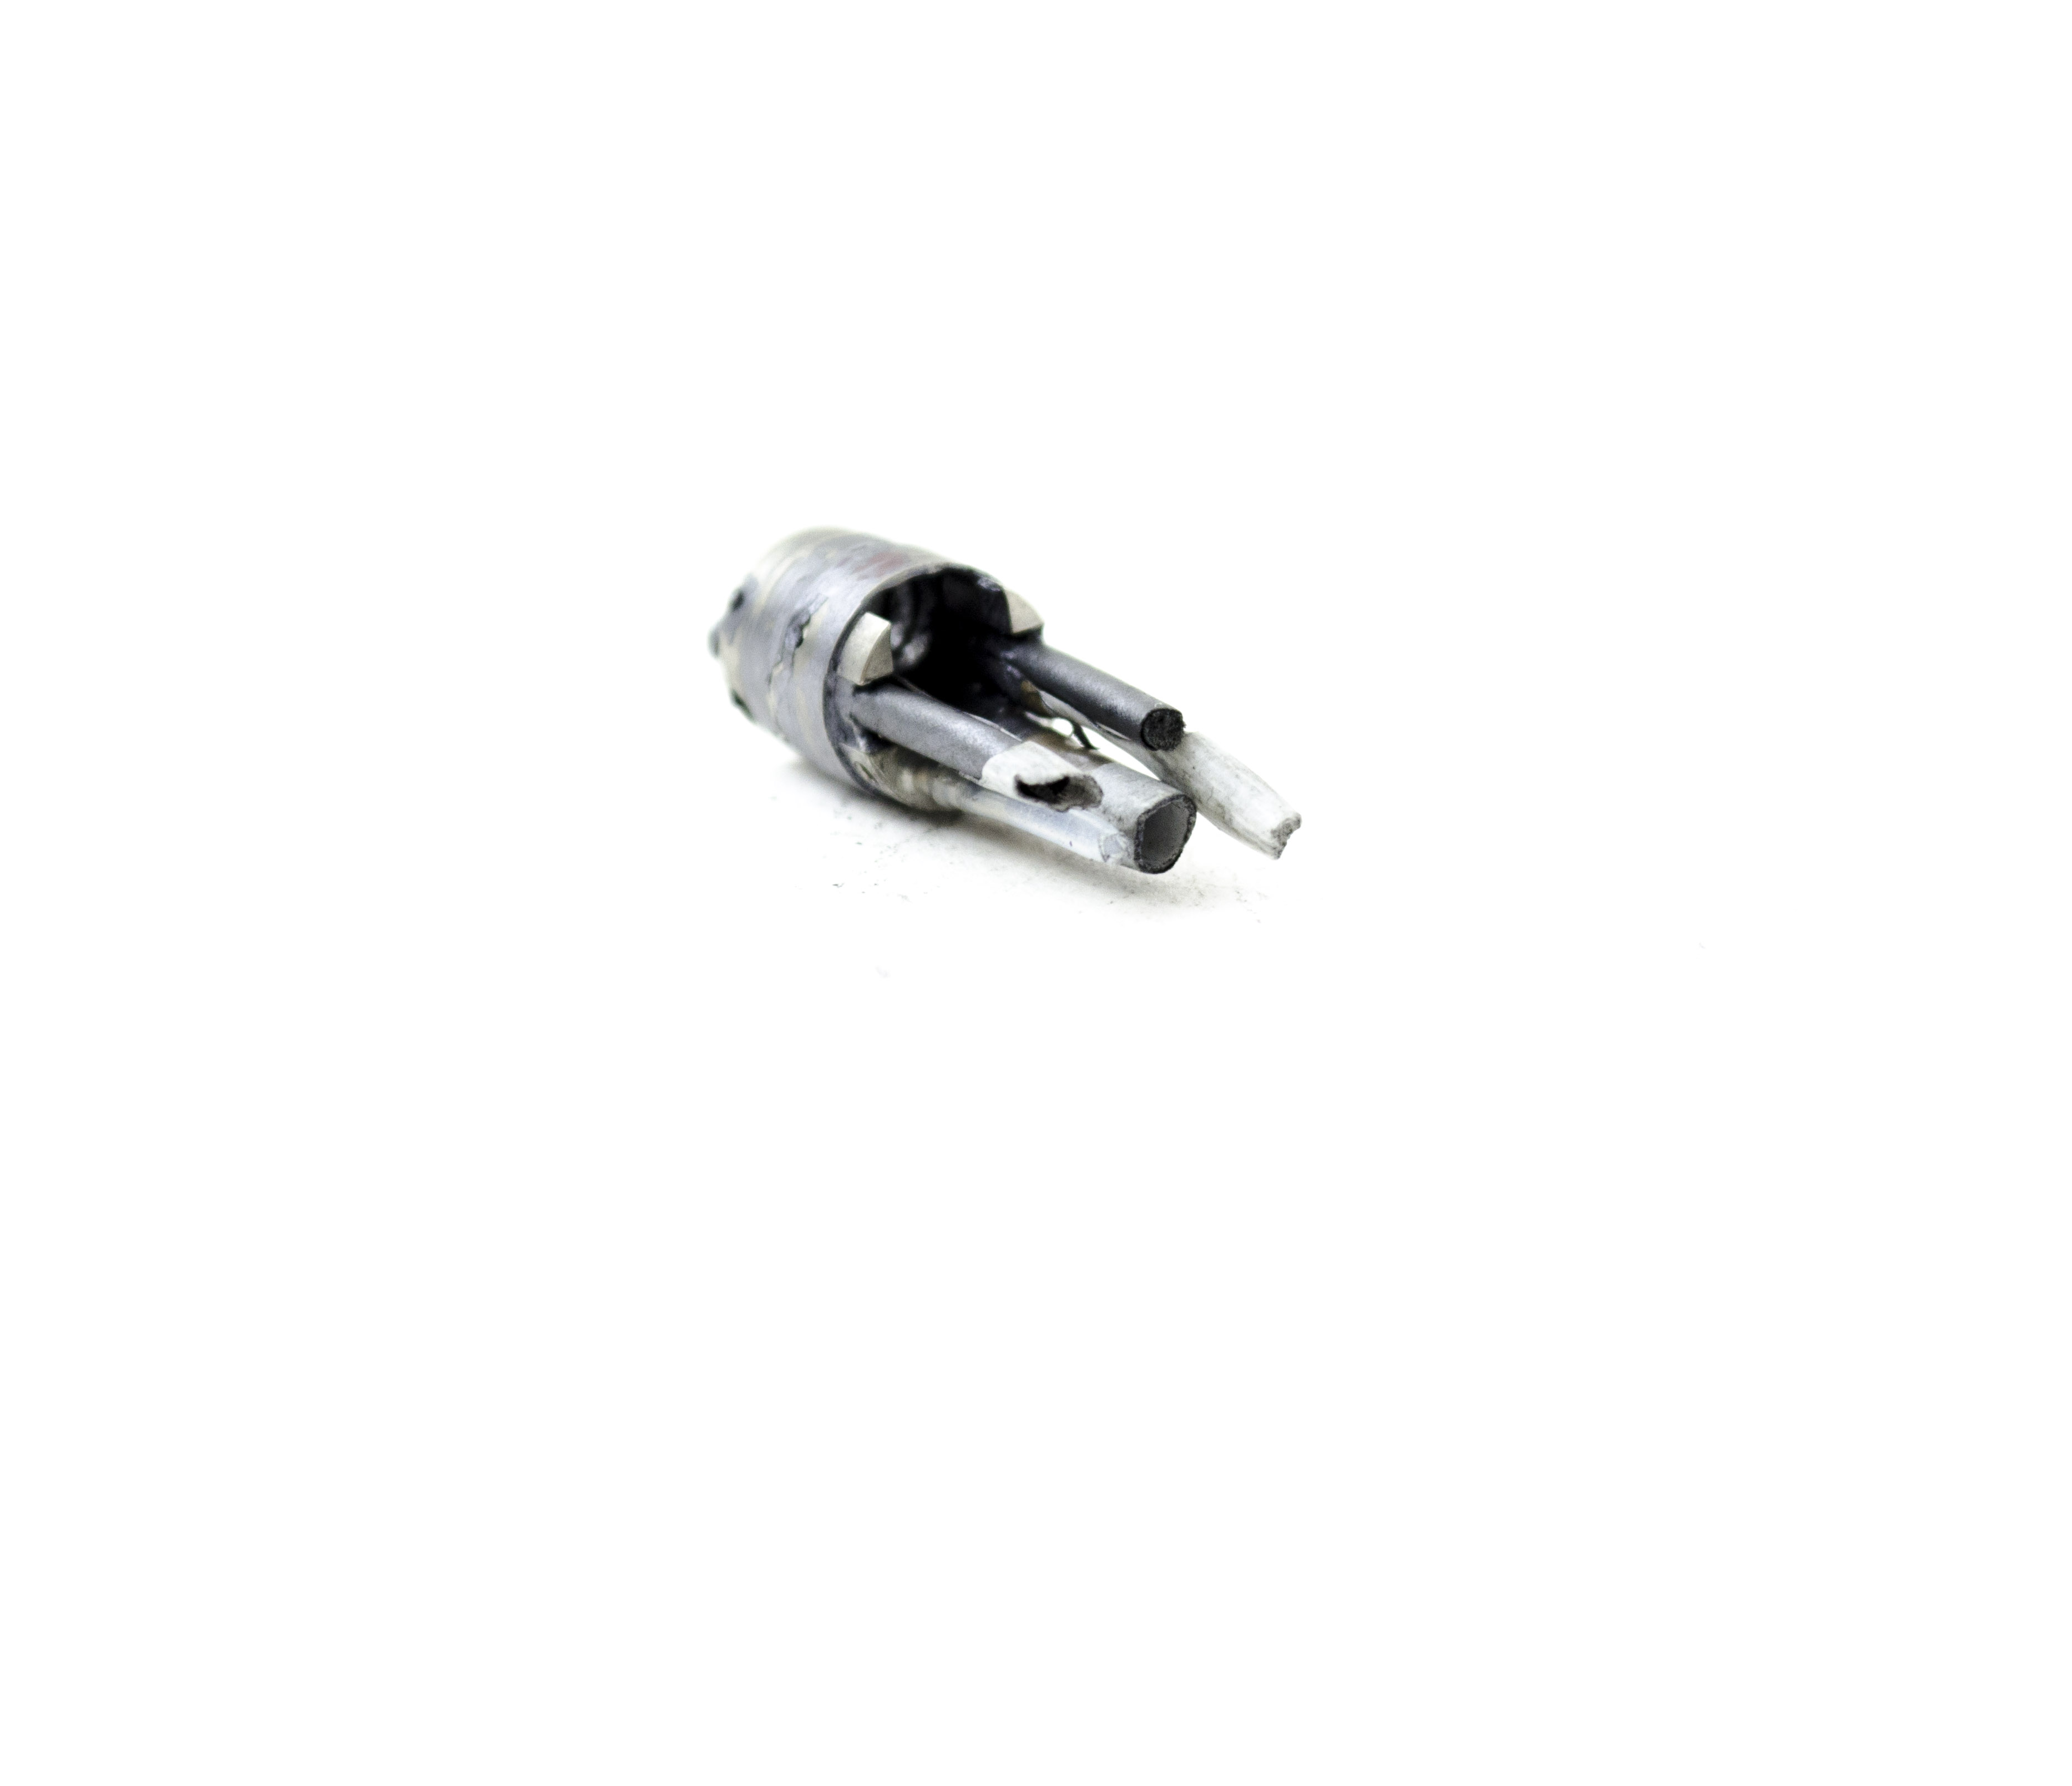 OEM Distal Tip with Lenses - PCF-100, SIF-100